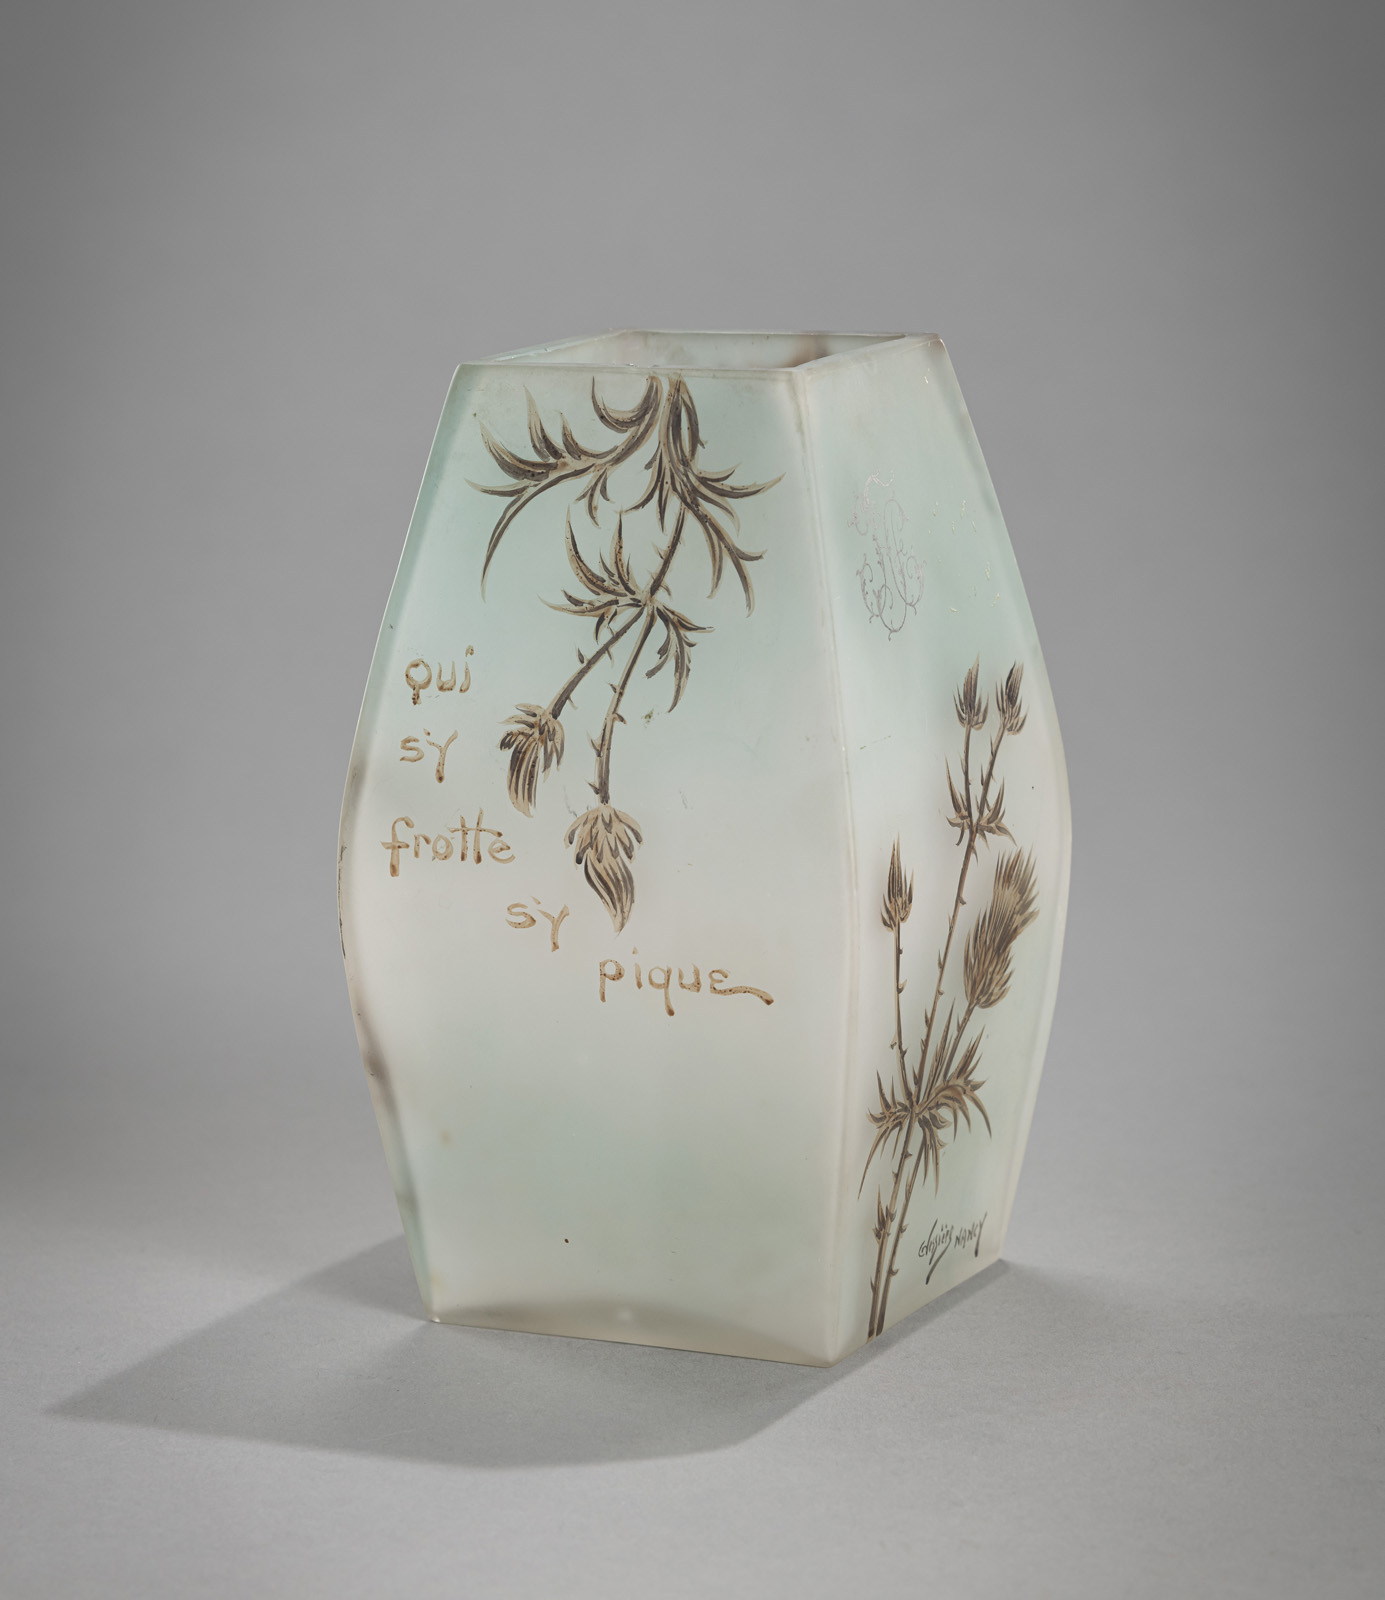 AN ENAMEL PAINTED THISTLE PATTERN GLASS VASE - Image 2 of 7